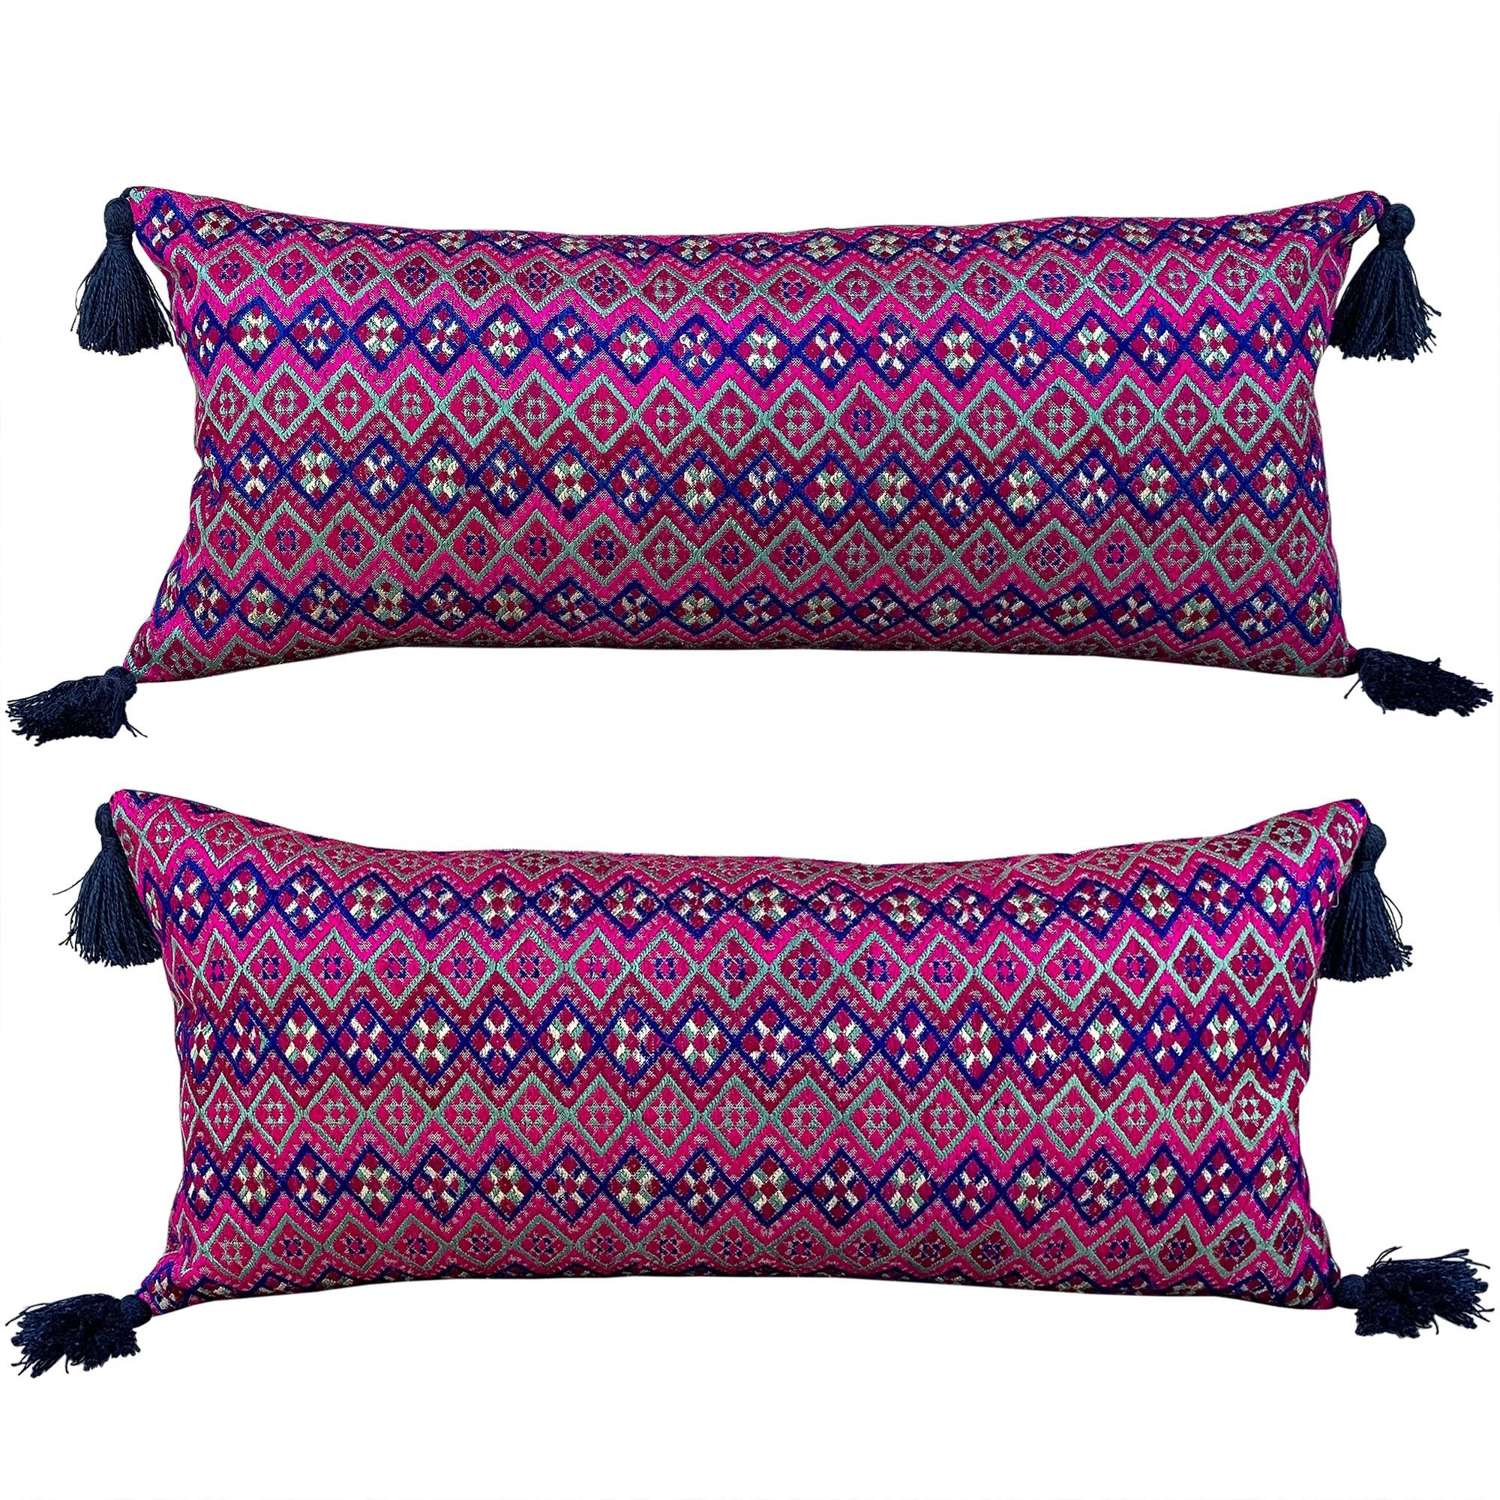 Zhuang cushions with tassels